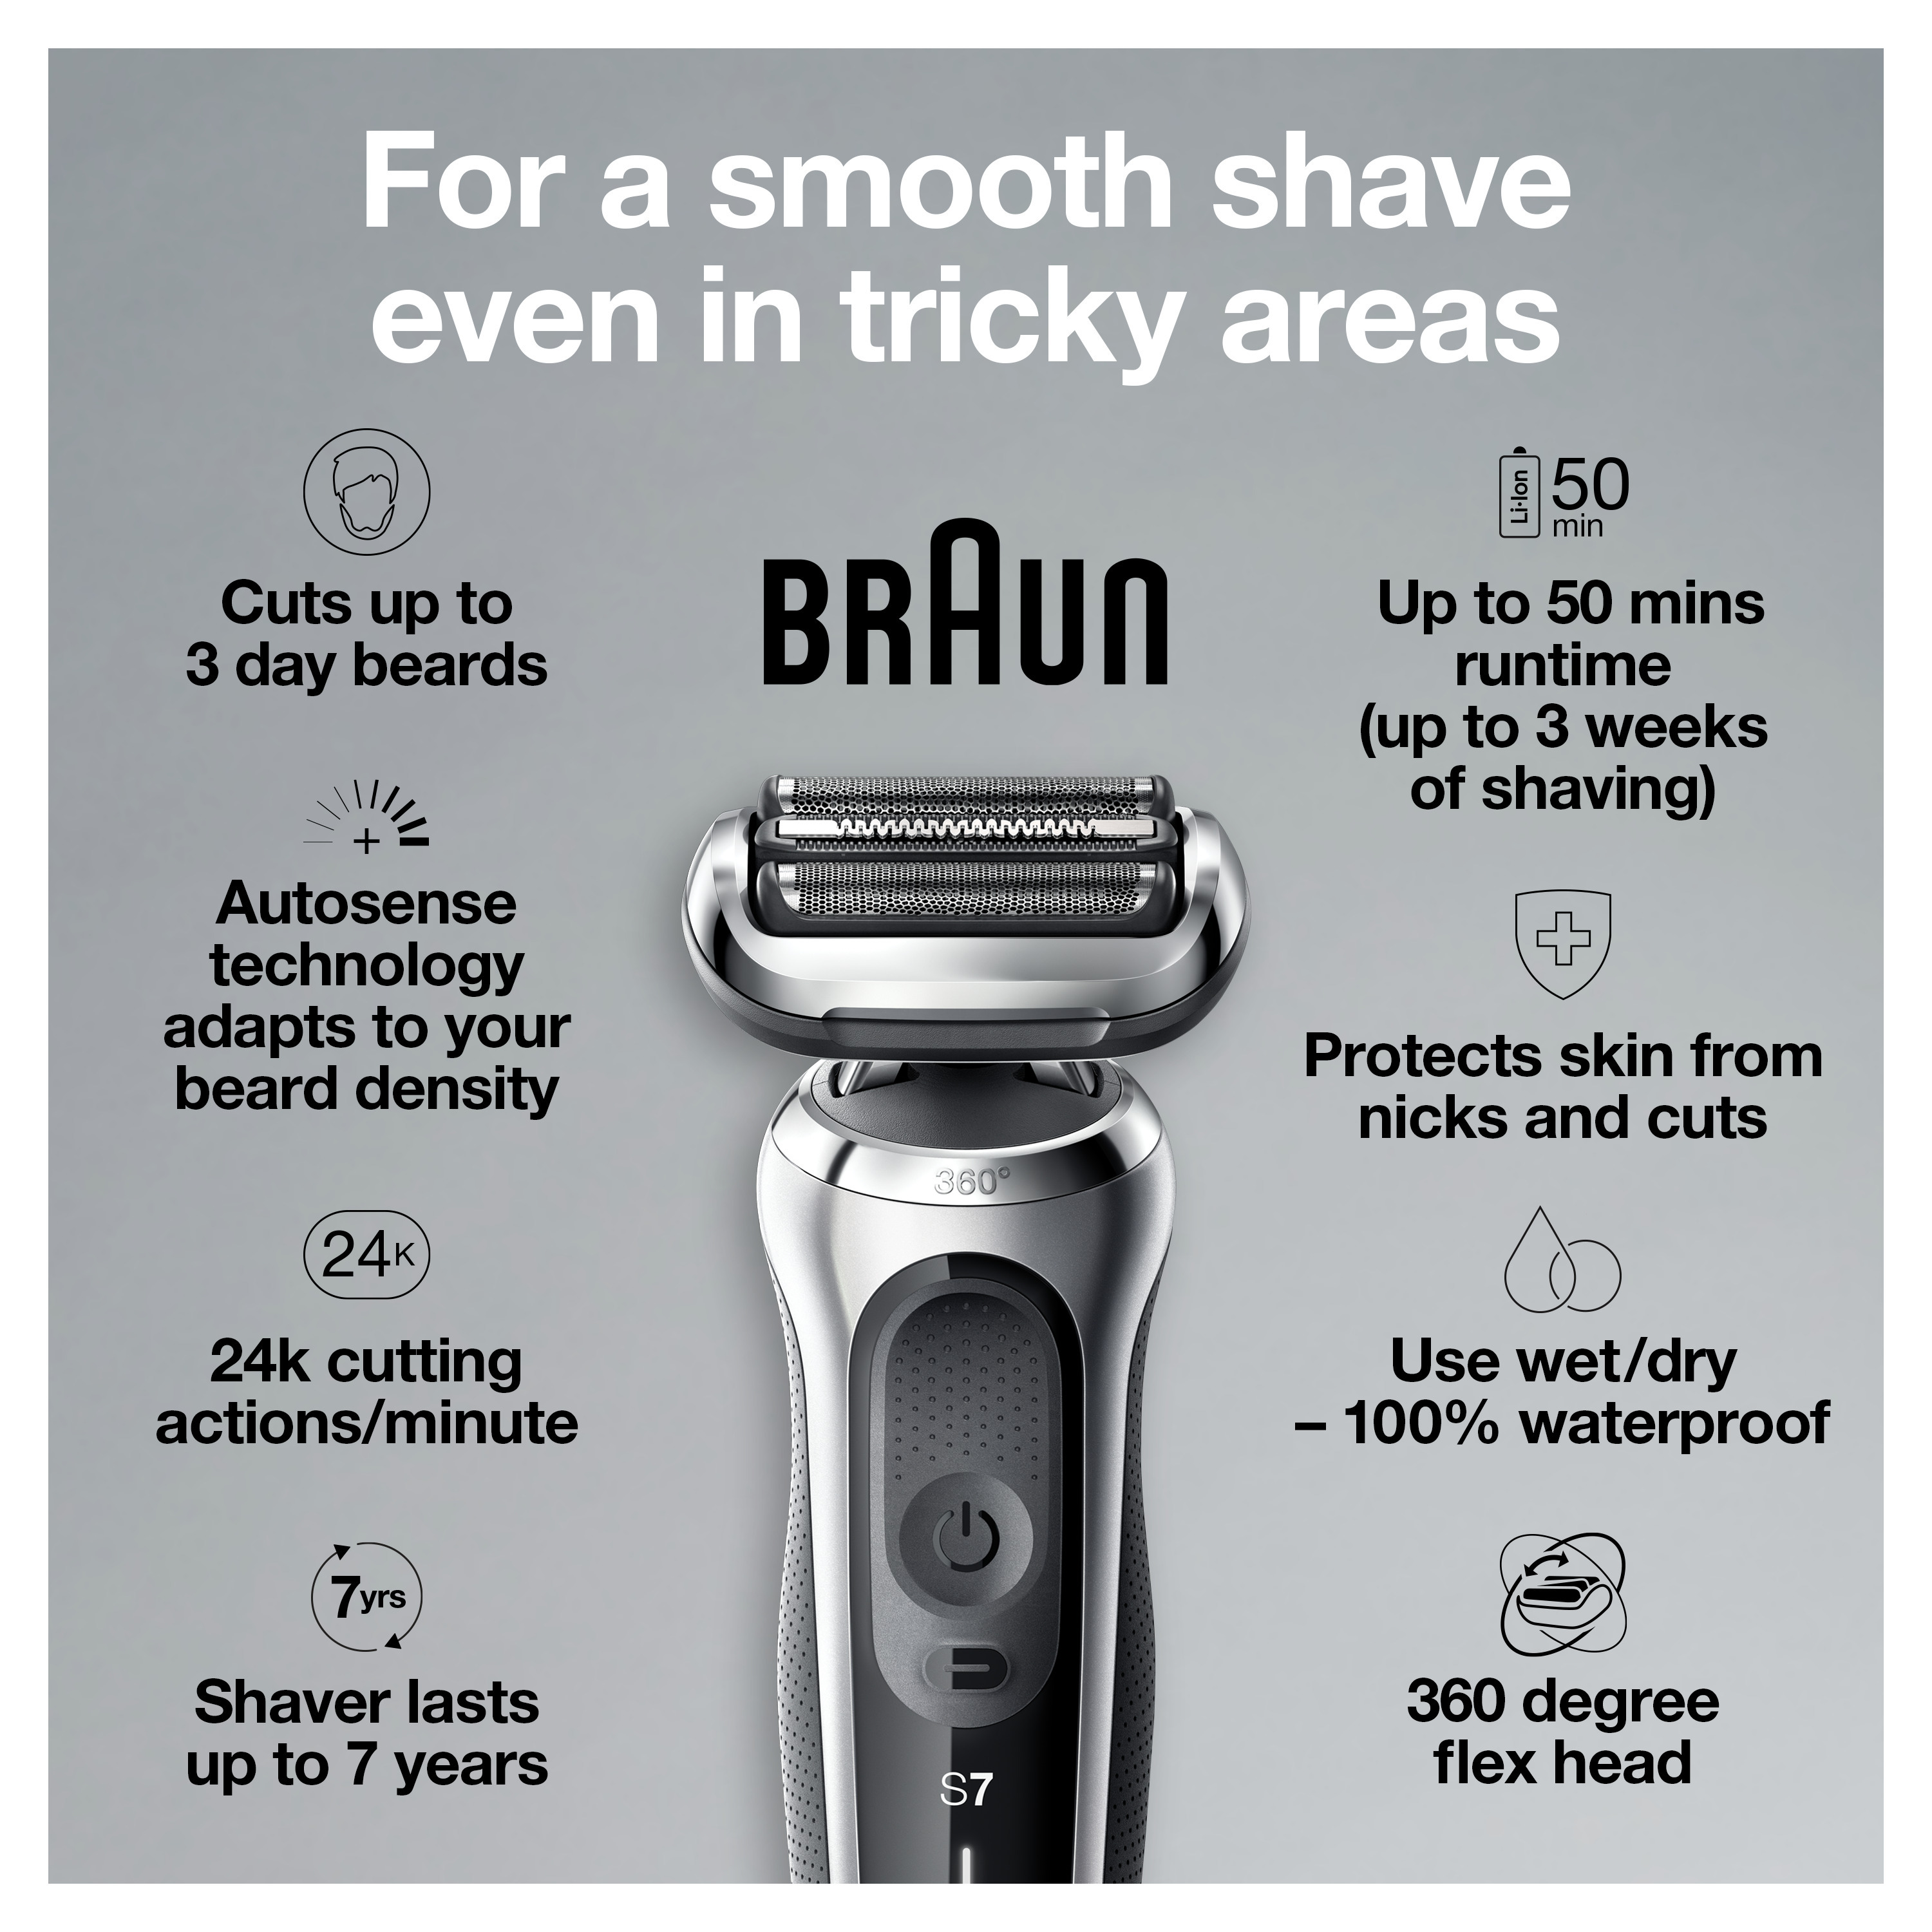 Braun Series 7 7025s Flex Rechargeable Wet Dry Men's Electric Shaver with Beard Trimmer - image 4 of 12